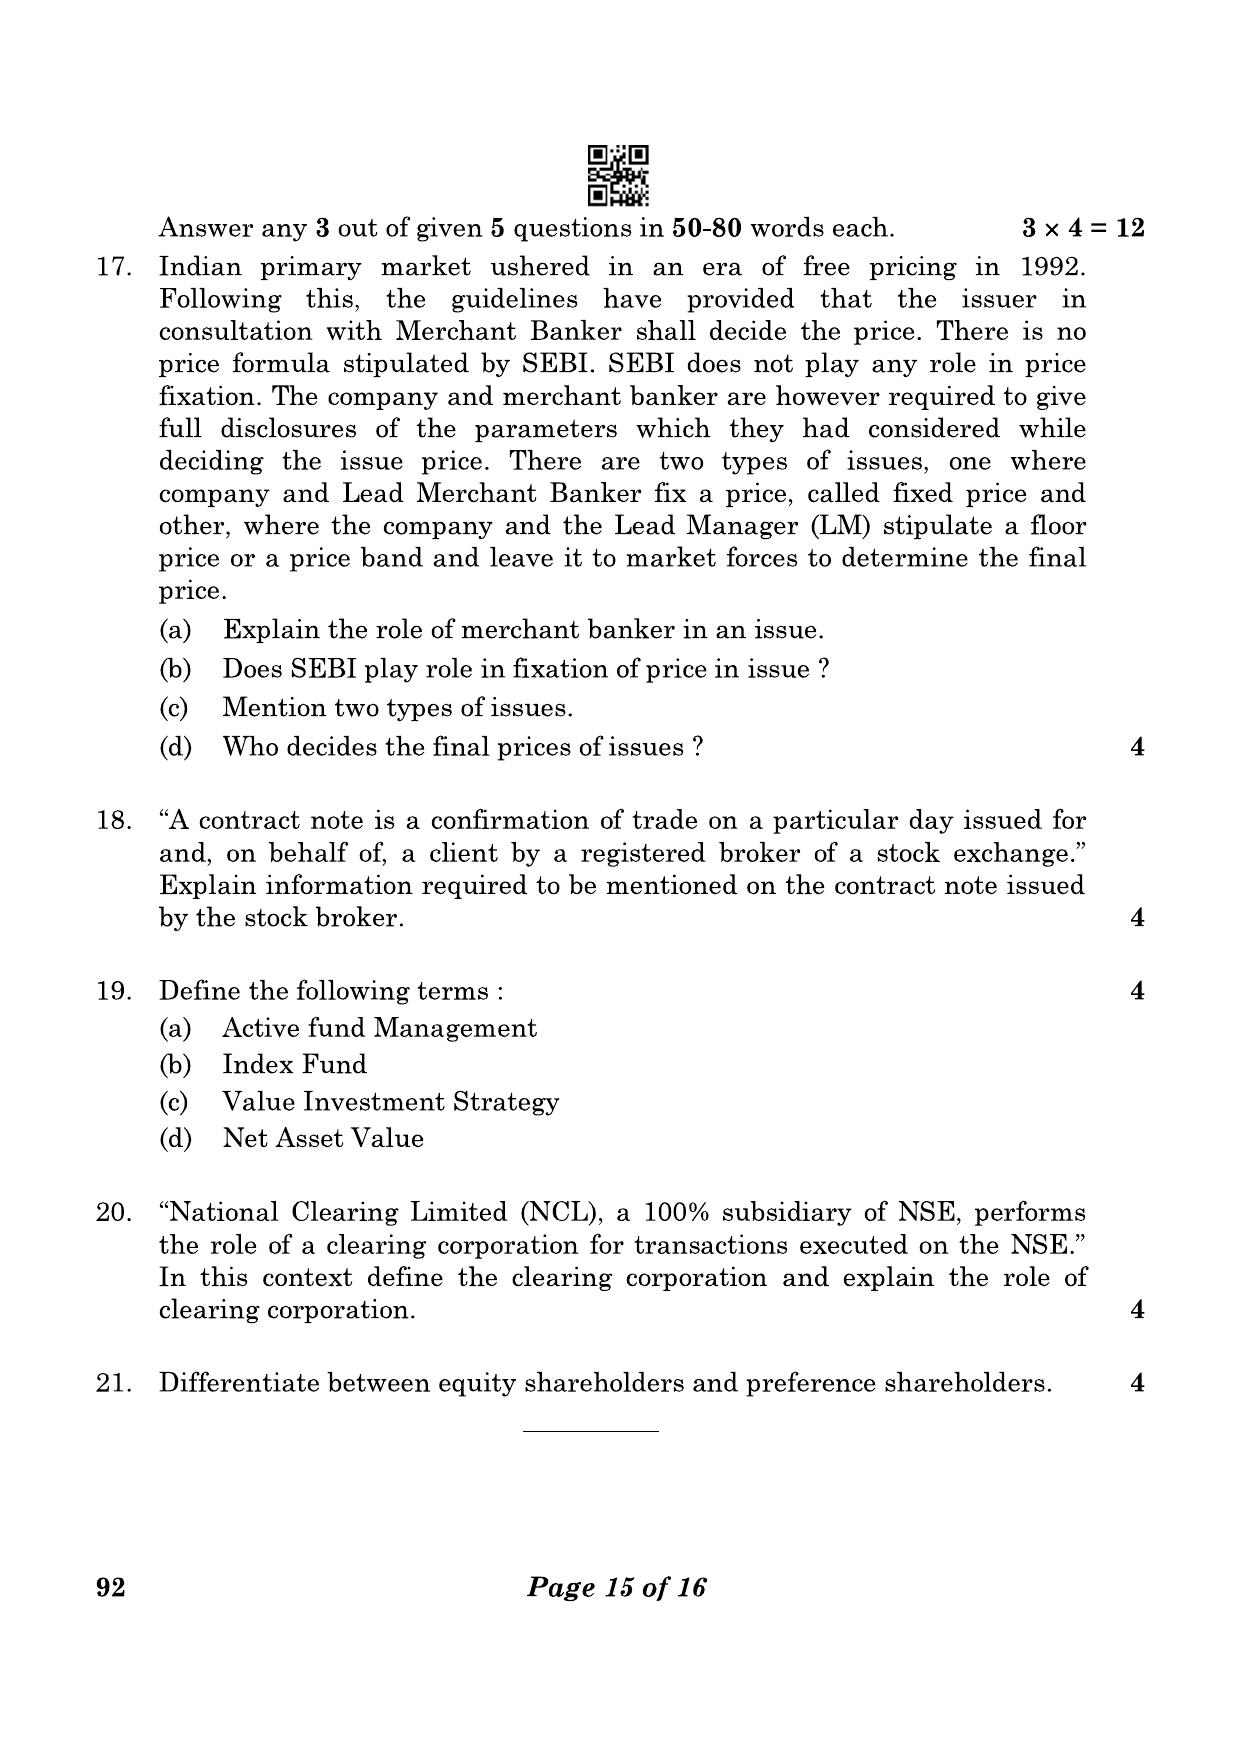 CBSE Class 10 92 Introduction To Financial Markets 2023 Question Paper - Page 15